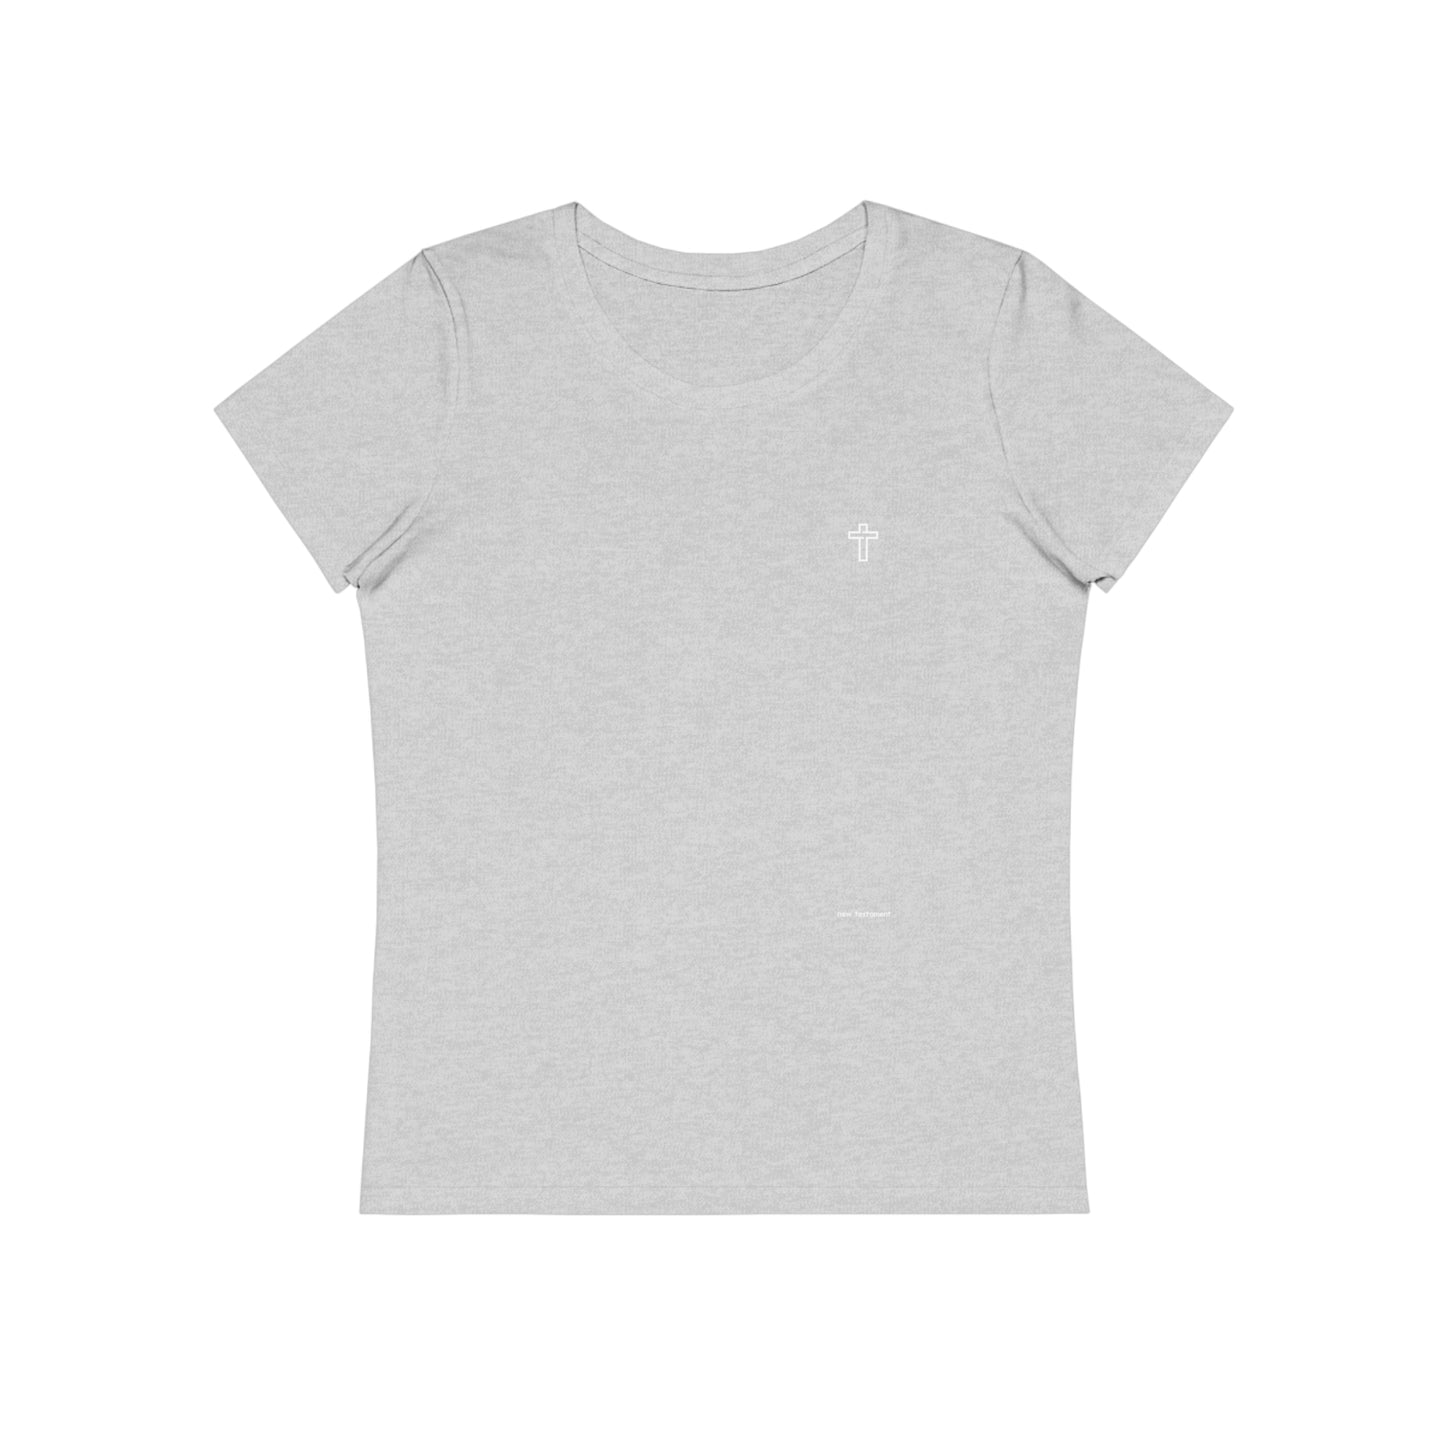 Logo's Women's Fitted T